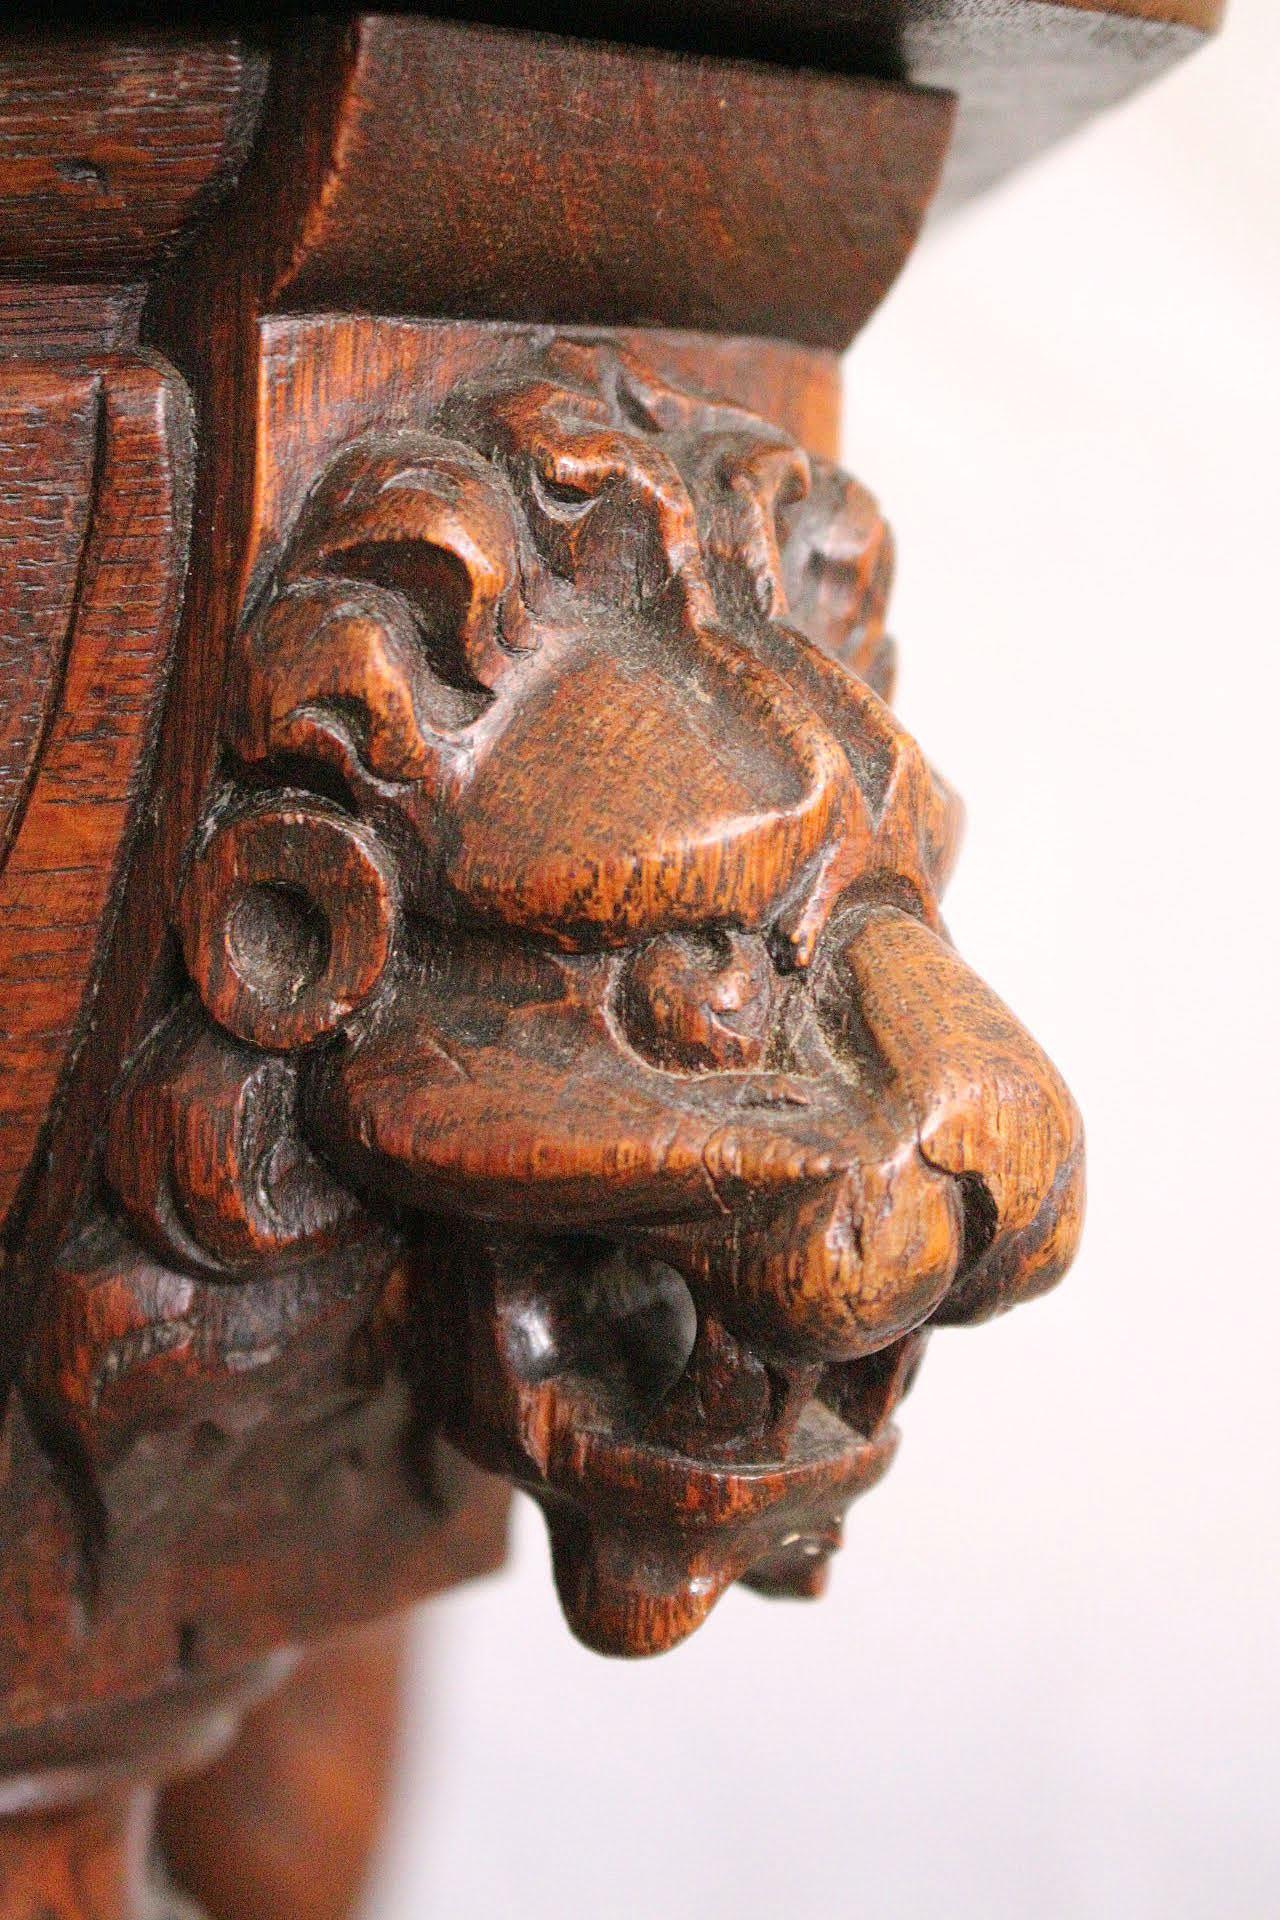 19th century Renaissance Revival carved solid oak dining table
Extendable
Lion Heads on each corner
French Henri II revival circa 1860
This table extends if required with traditional simple plain wood boards, alternatively if you would like